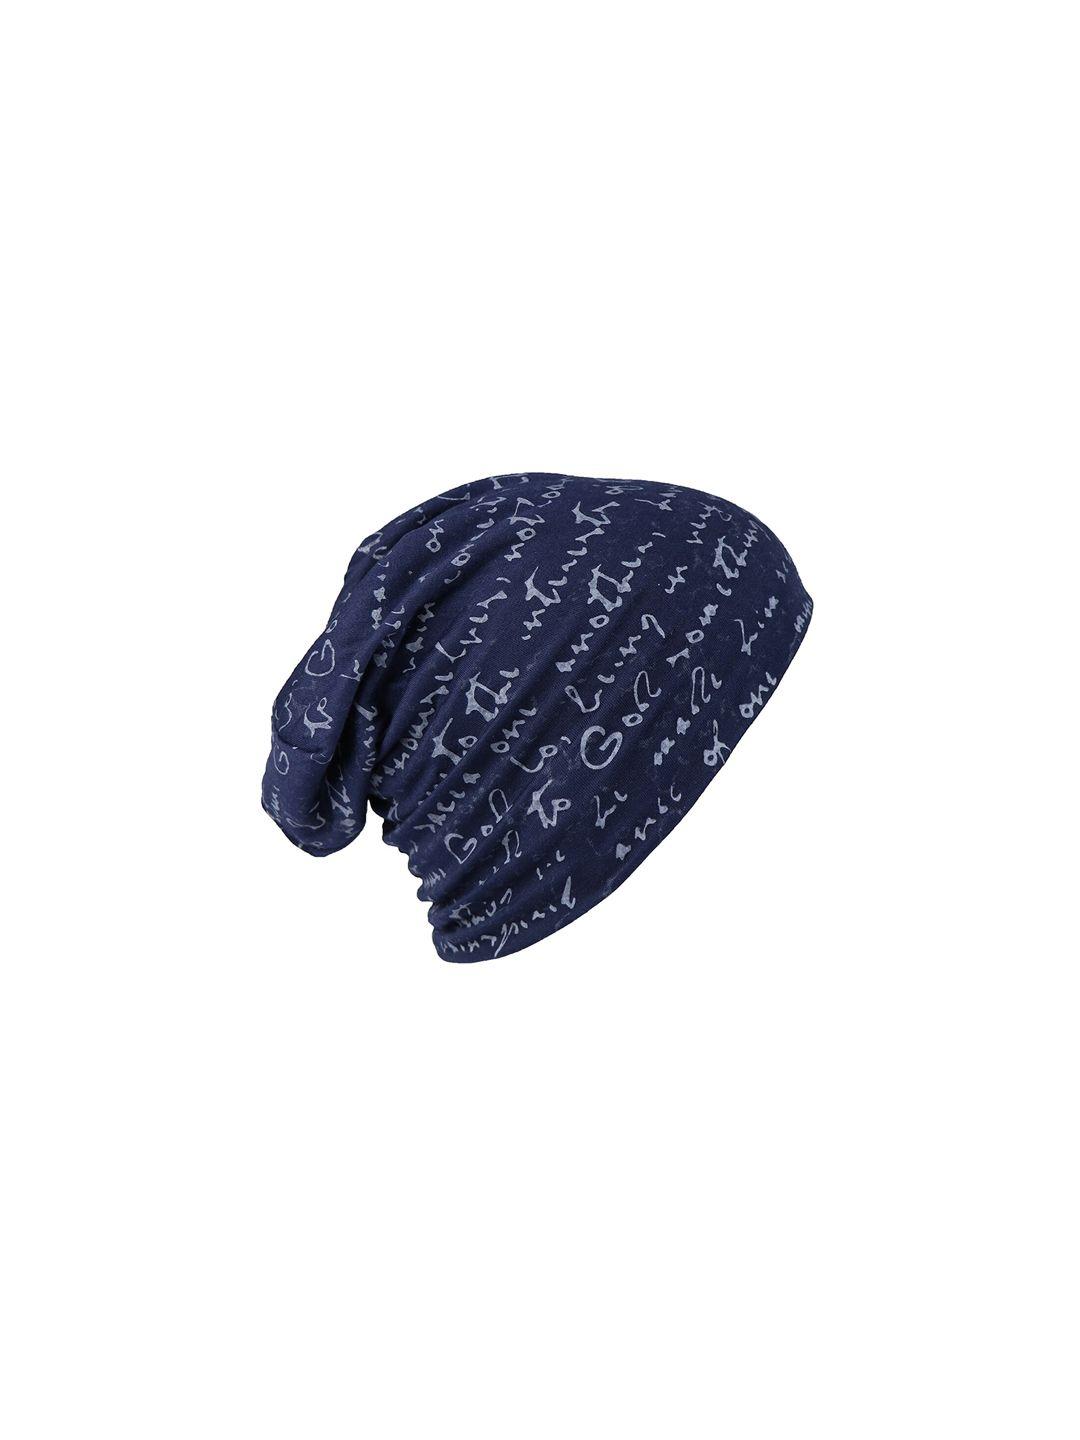 isweven unisex navy blue & white printed beanie